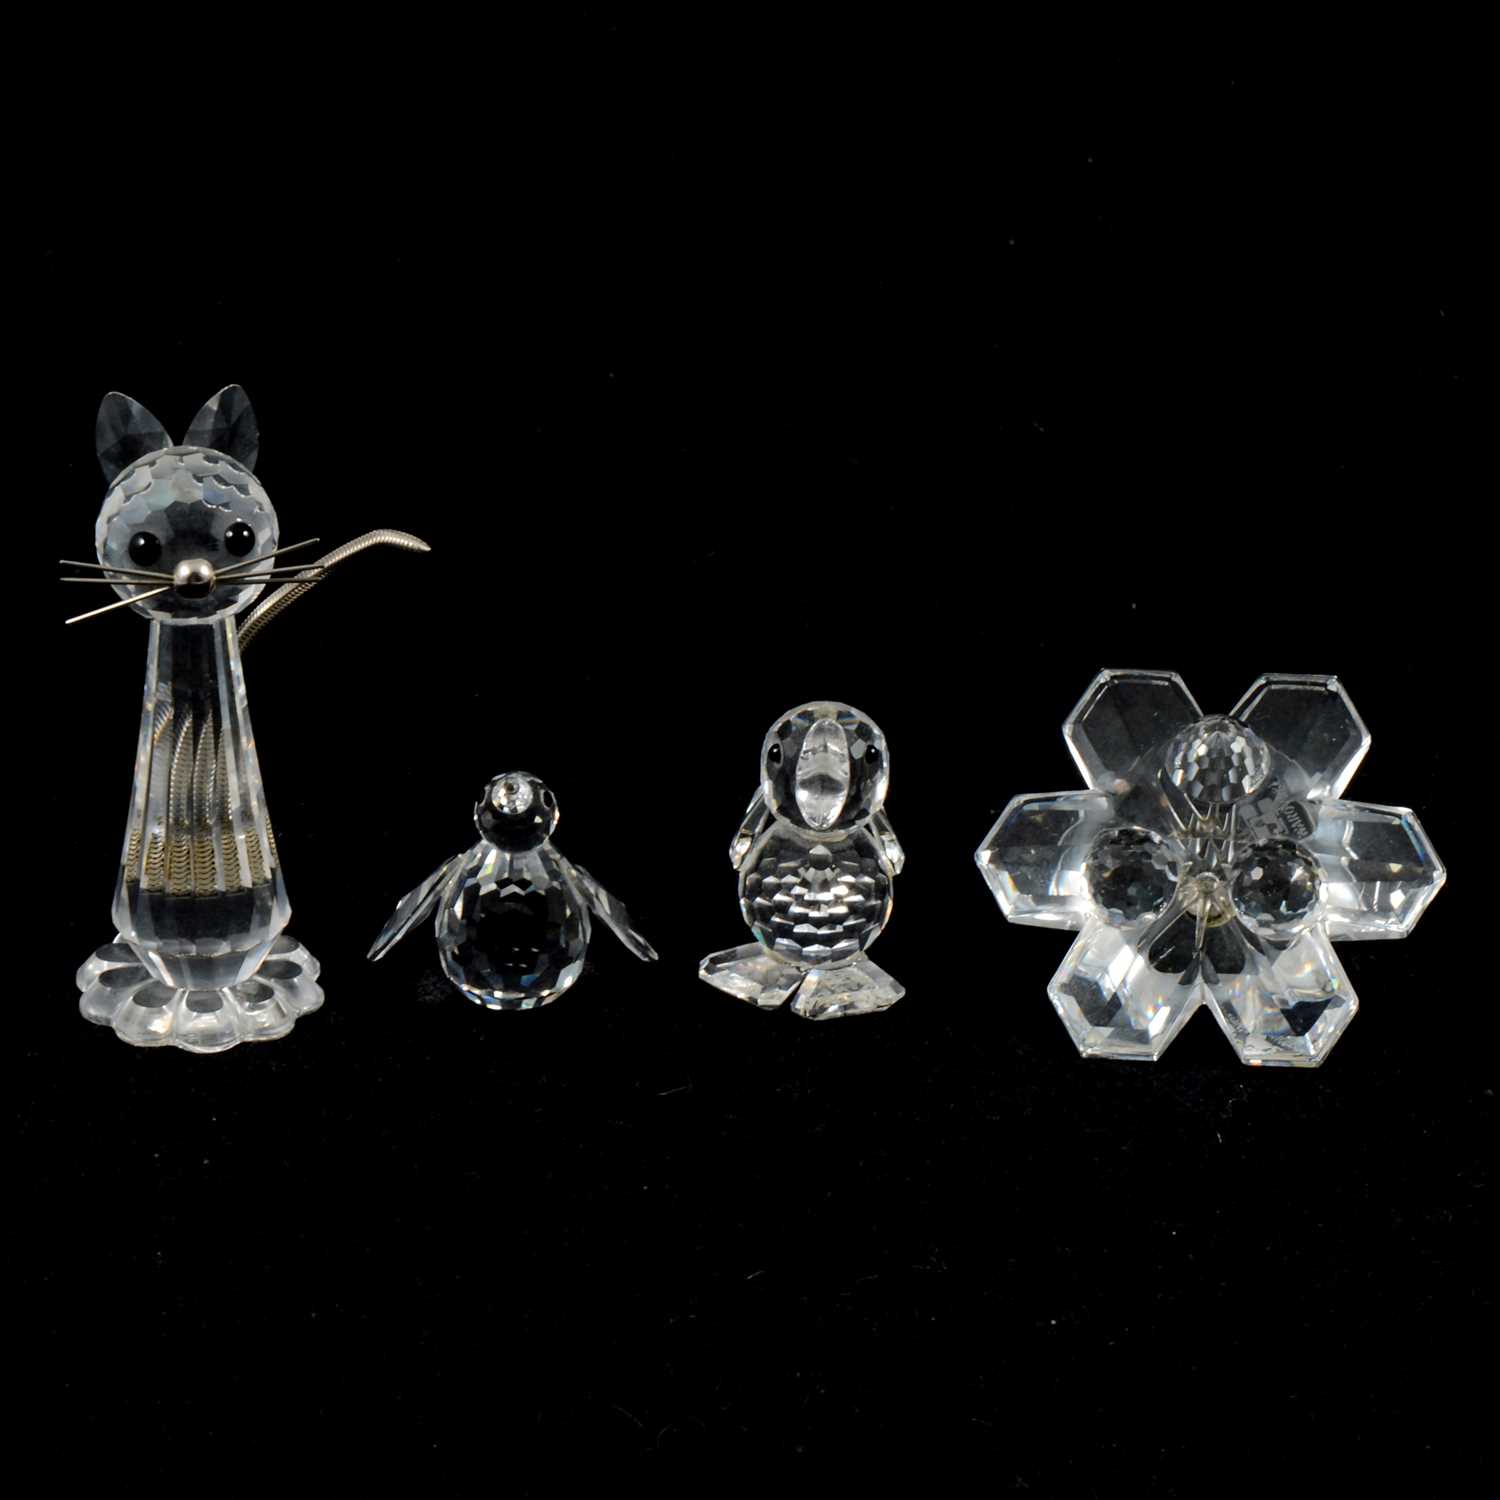 A small collection of Swarovski Crystal